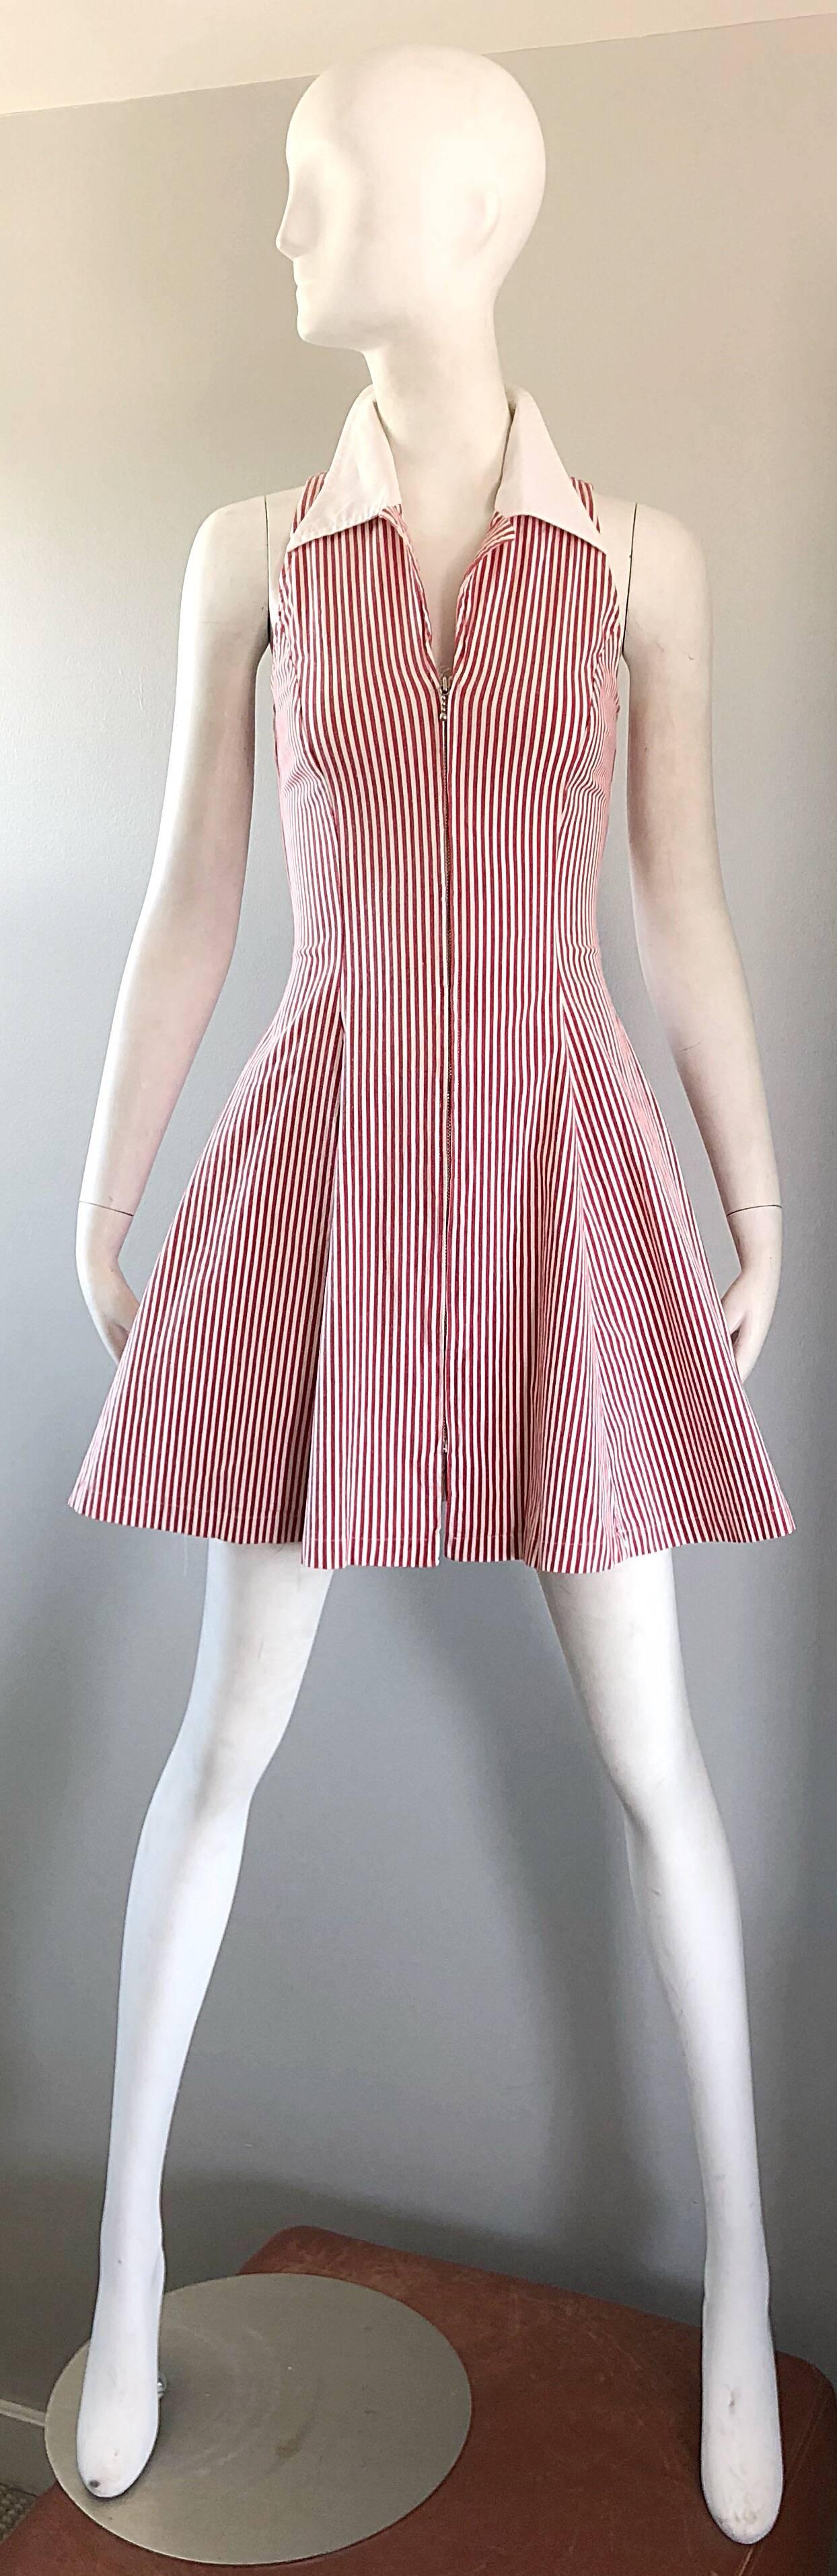 Chic late 80s  / 90s  does 1950s / 50s ANGELO TARLAZZI red and white seersucker fit n' flare nautical dress! Features vertical stripes throughout. Sleek white collared tailored bodice with a forgiving flared skirt. Full metal zipper up the front